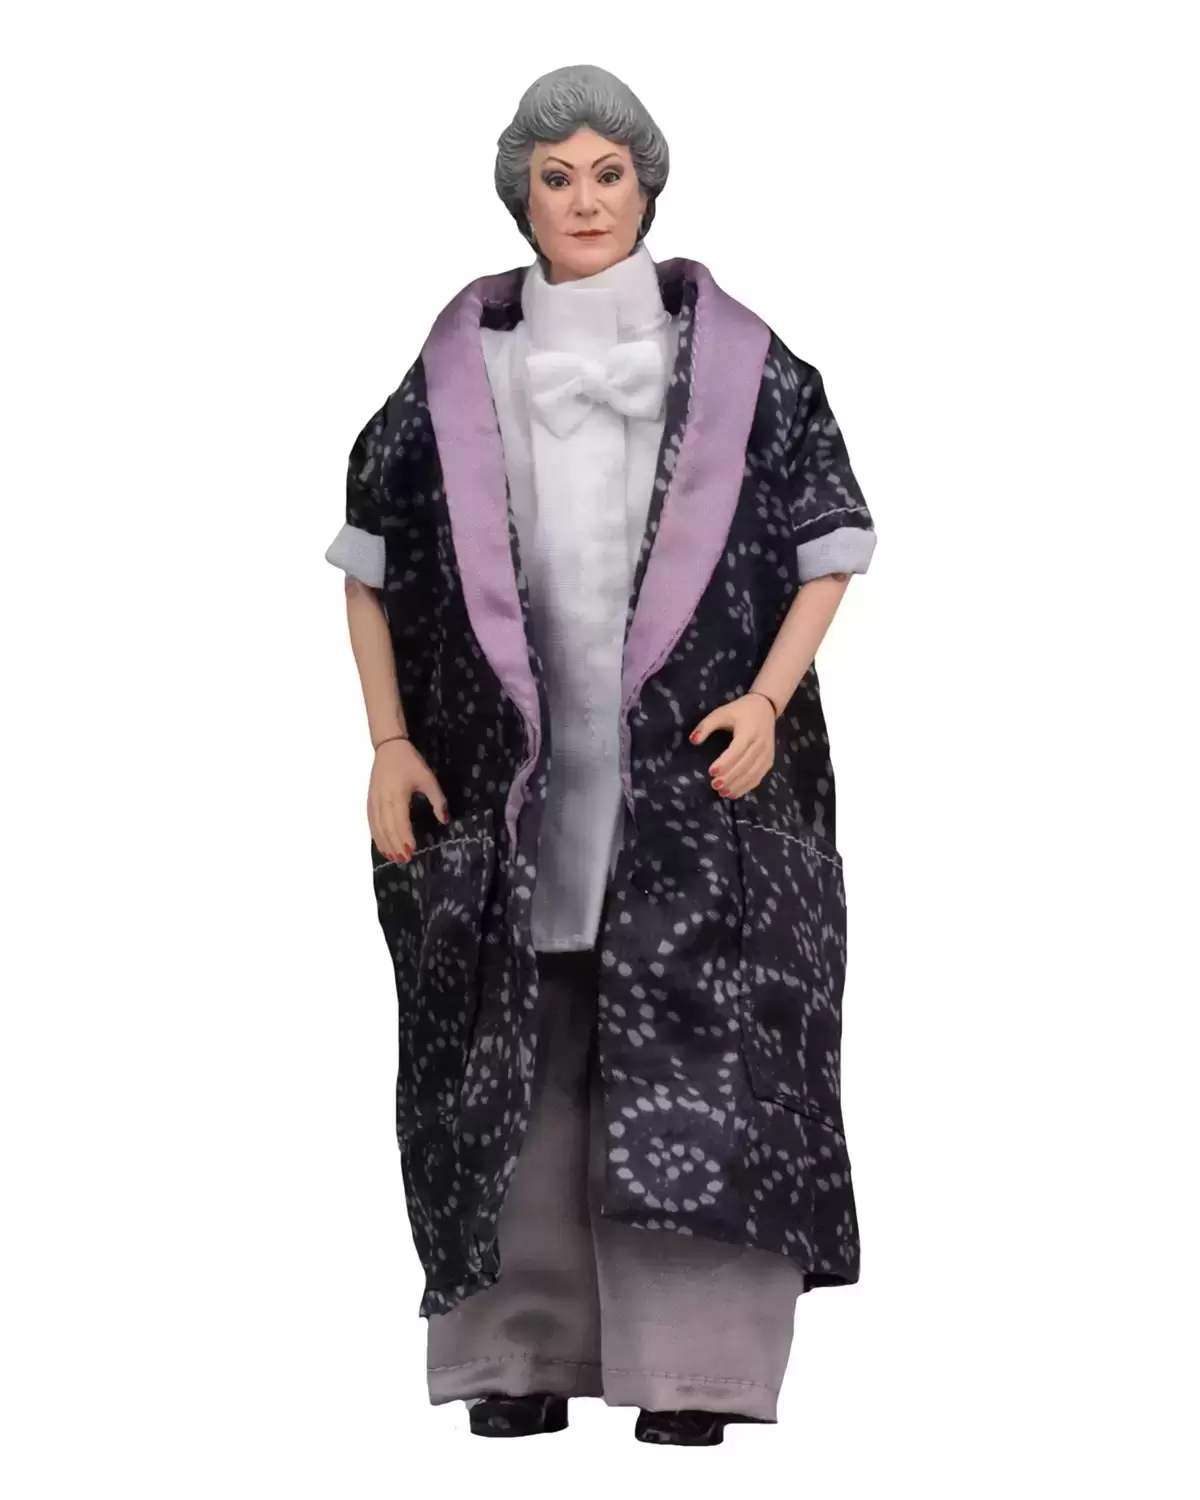 NECA - The Golden Girls - Dorothy Clothed